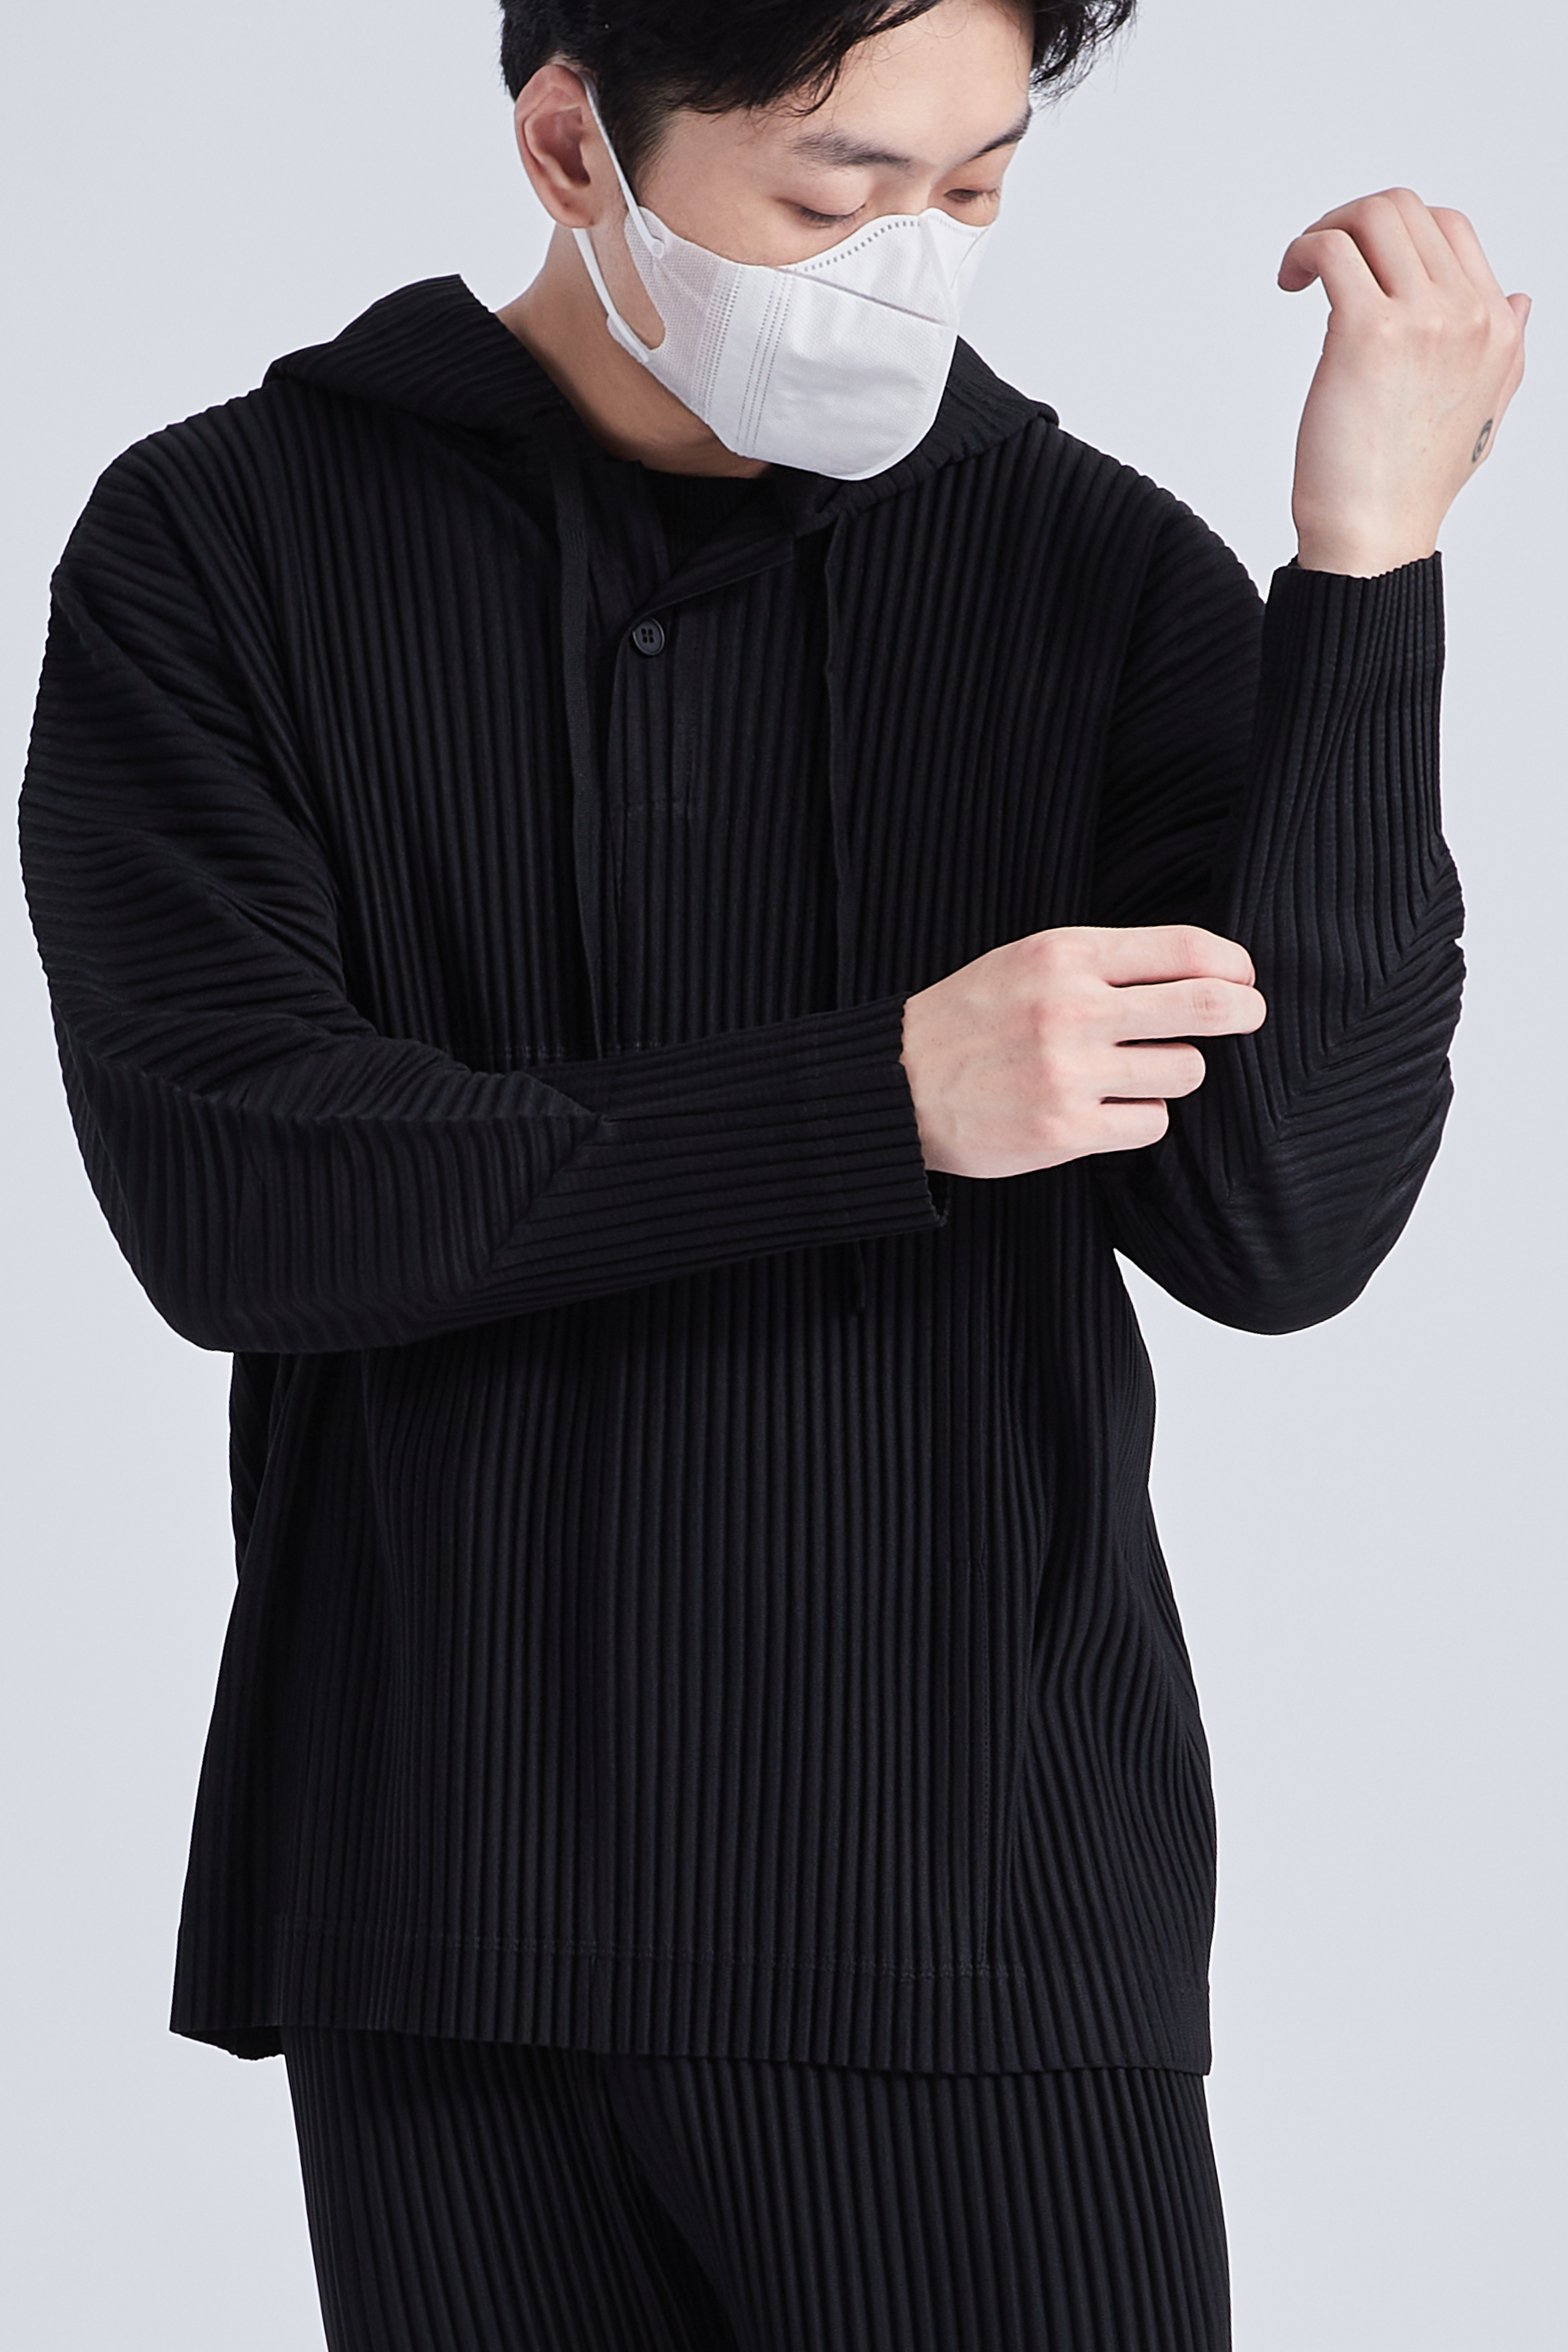 Pleated Hooded Sweatshirt black   miteigi Homme Plissé Issey Miyake Men's Ribbed drawcords Long Sleeves Casual Loose Fitting Top with American Japanese Version fitness sport Tops activewear sports Sweatshirts for Man Plus size drawstrings hoodie mens Fashionable sportswear